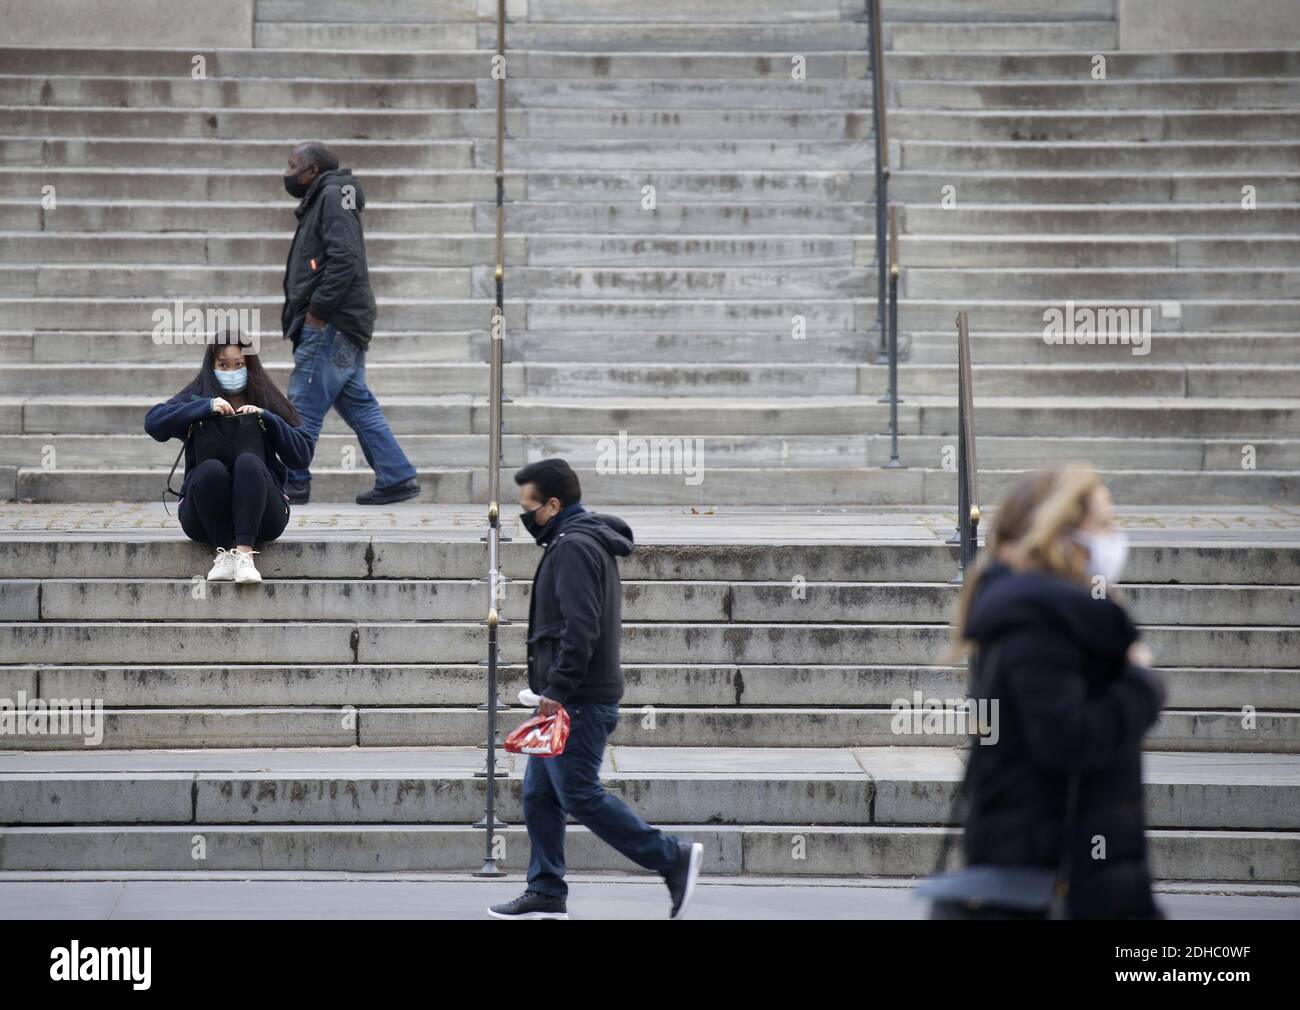 New York, United States. 10th Dec, 2020. Pedestrians walk by the stairs to the New York Public Library wearing a face mask to protect from and prevent the spread COIVD-19 in New York City on Thursday, December 10, 2020. Photo by John Angelillo/UPI Credit: UPI/Alamy Live News Stock Photo